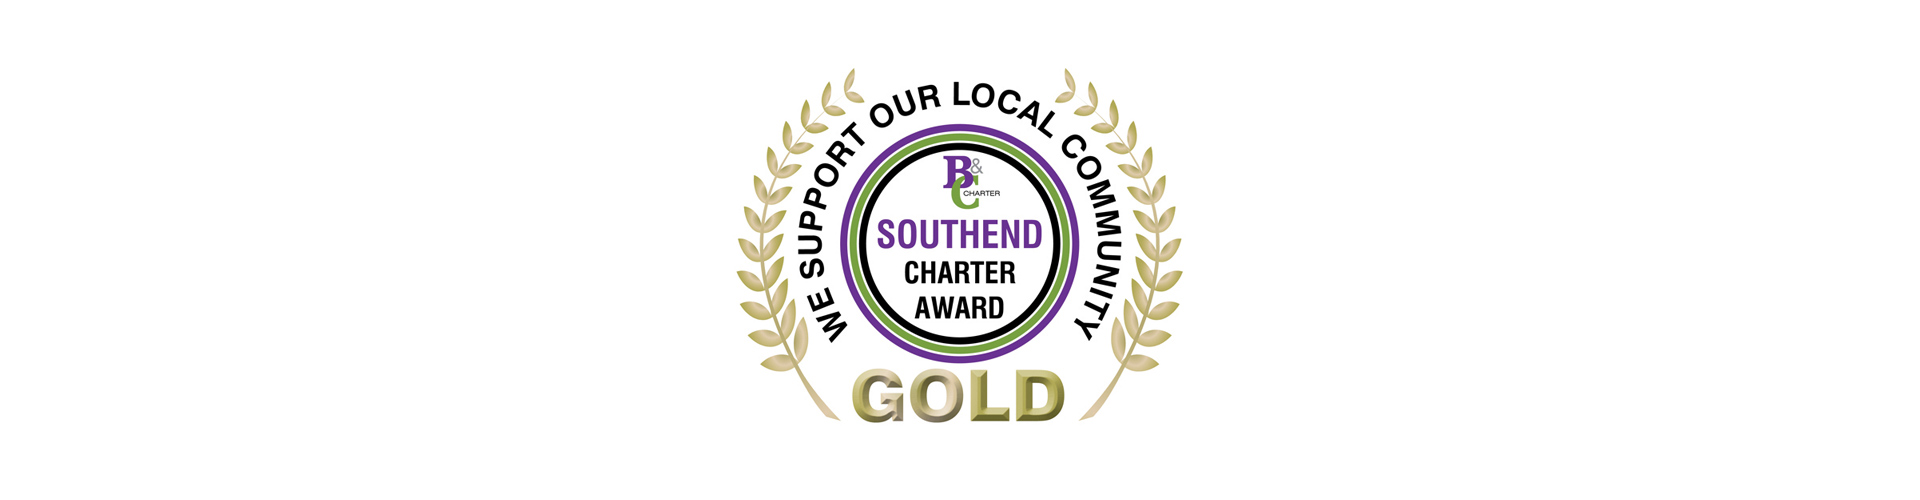 Hood Group awarded Gold Southend Business and Community Charter Award